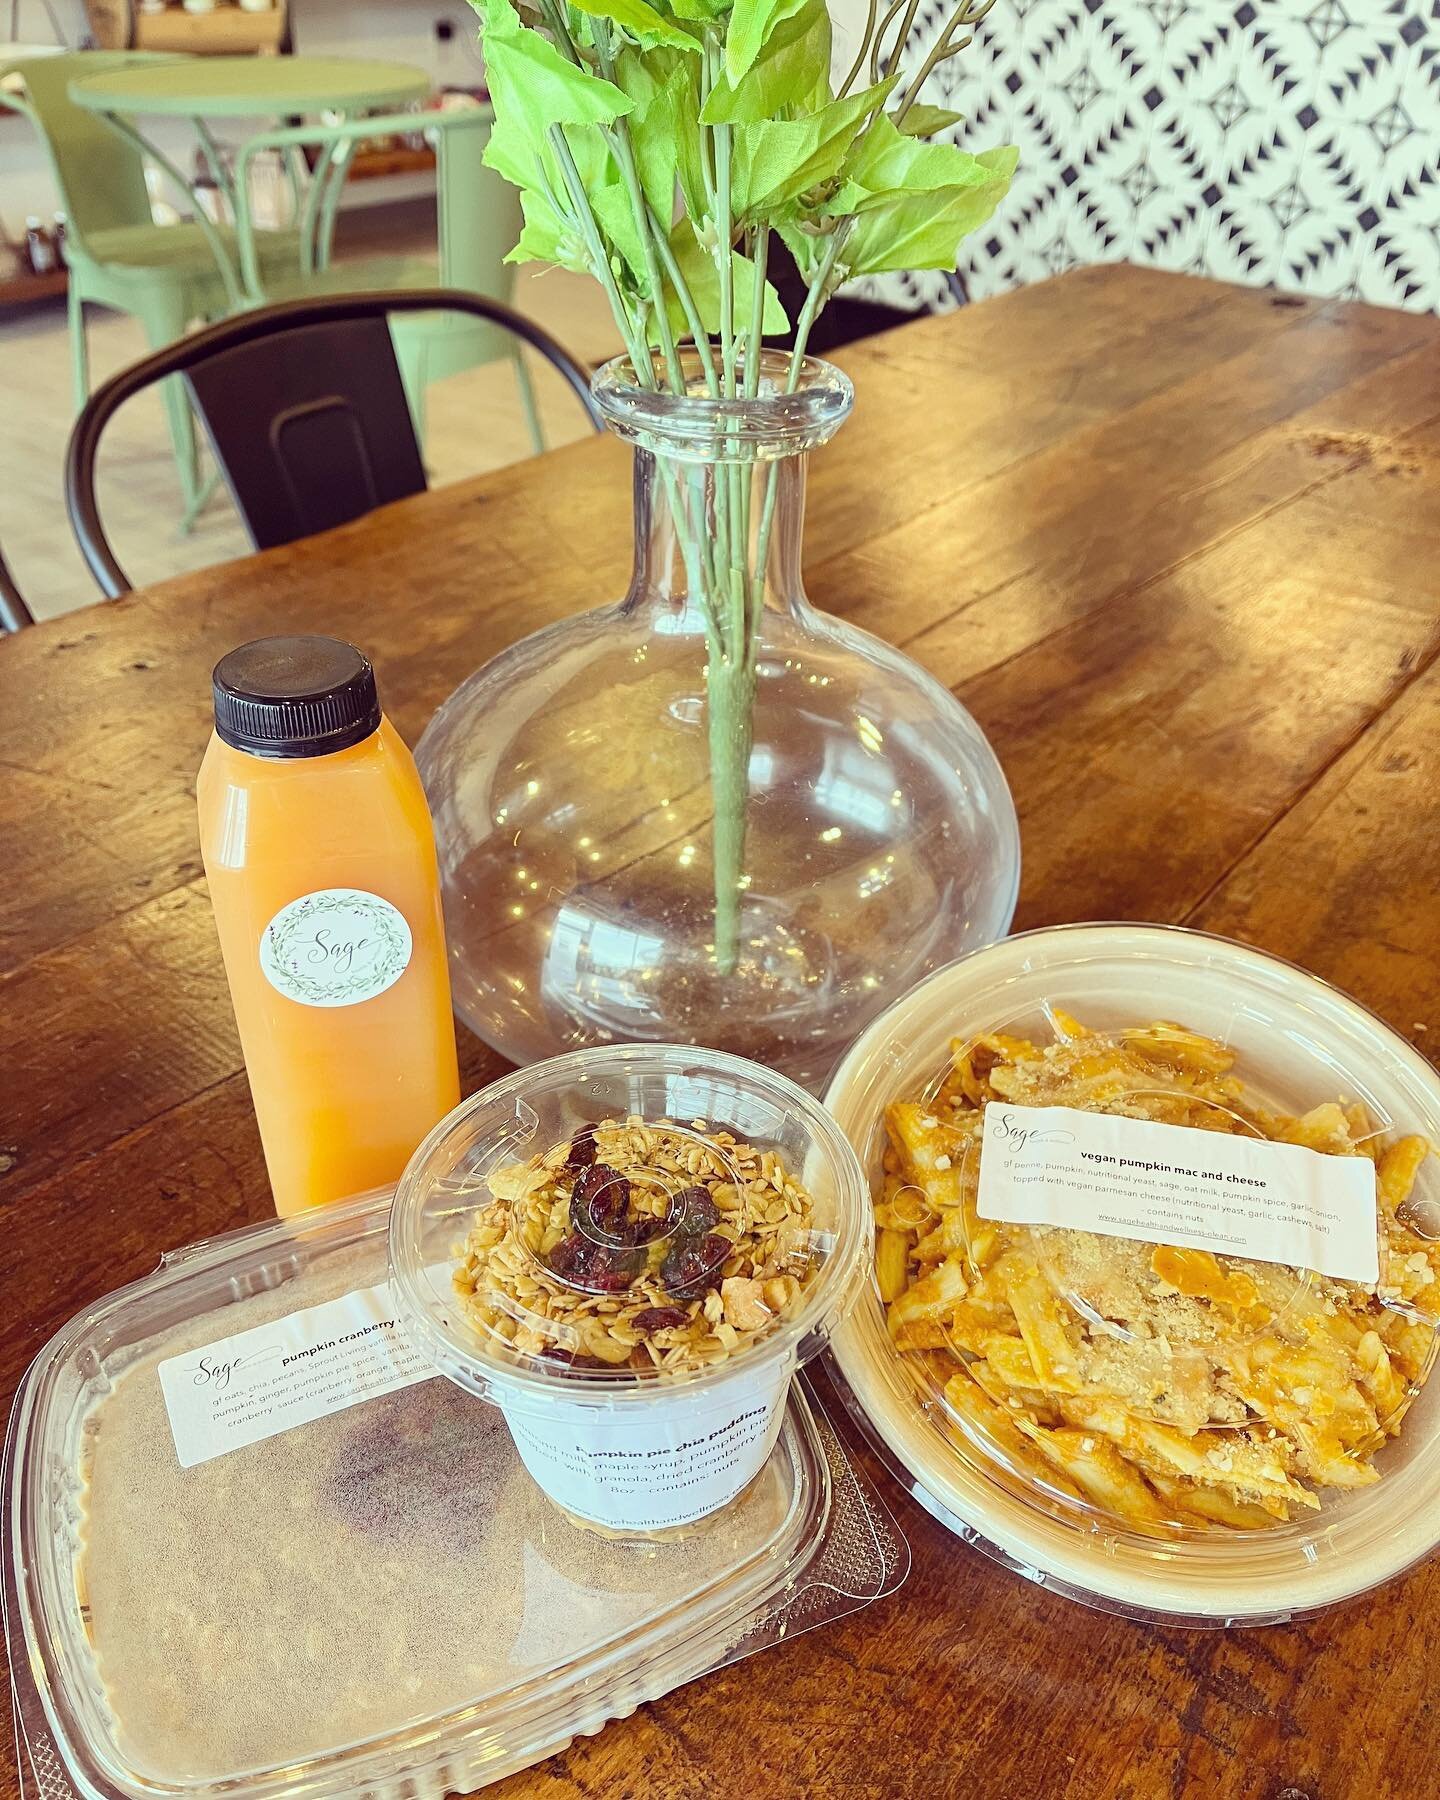 🎃We are celebrating all things pumpkin! Our specials this week are creamy pumpkin soup, vegan and gluten free pumpkin mac n&rsquo; cheese, pumpkin cranberry overnight oats, pumpkin pie chia pudding, Harry Potter inspired pumpkin cold pressed juice, 